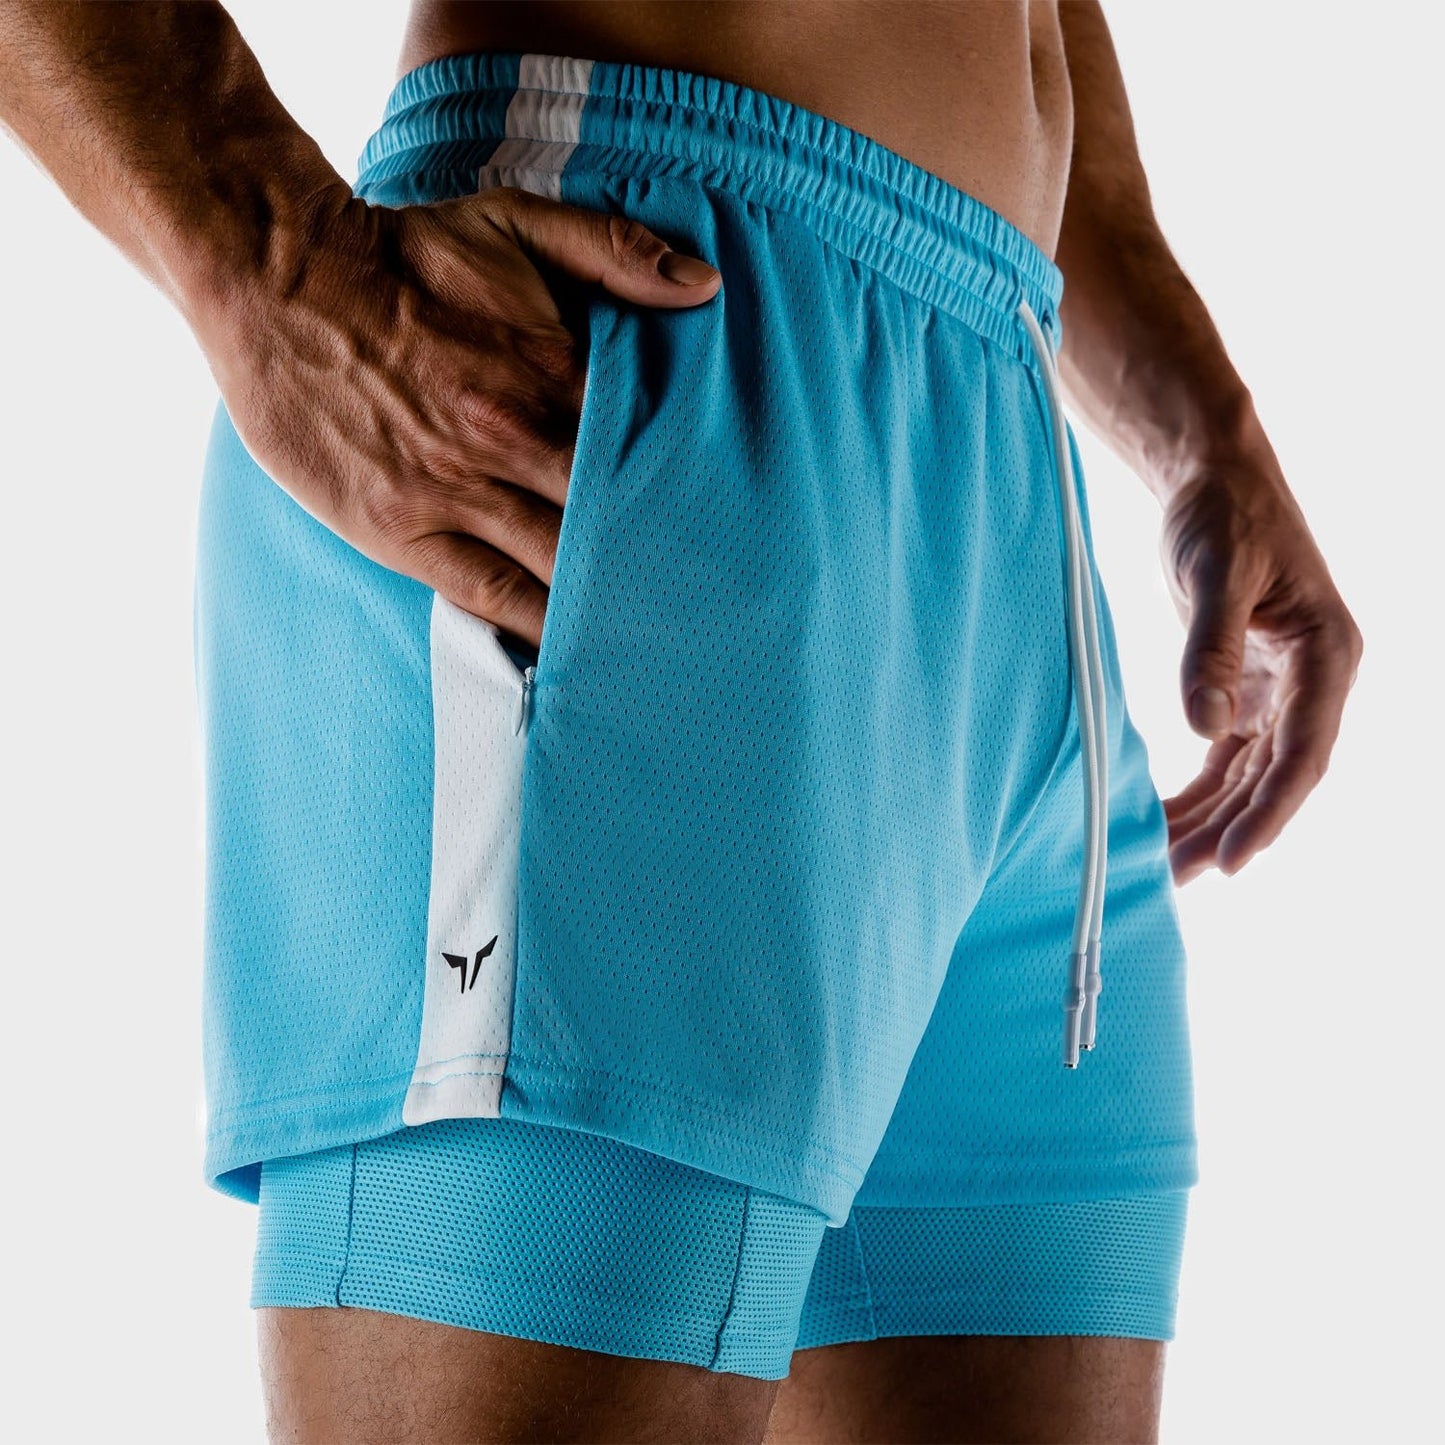 squatwolf-gym-wear-hybrid-performance-2-in-1-shorts-blue-workout-shorts-for-men